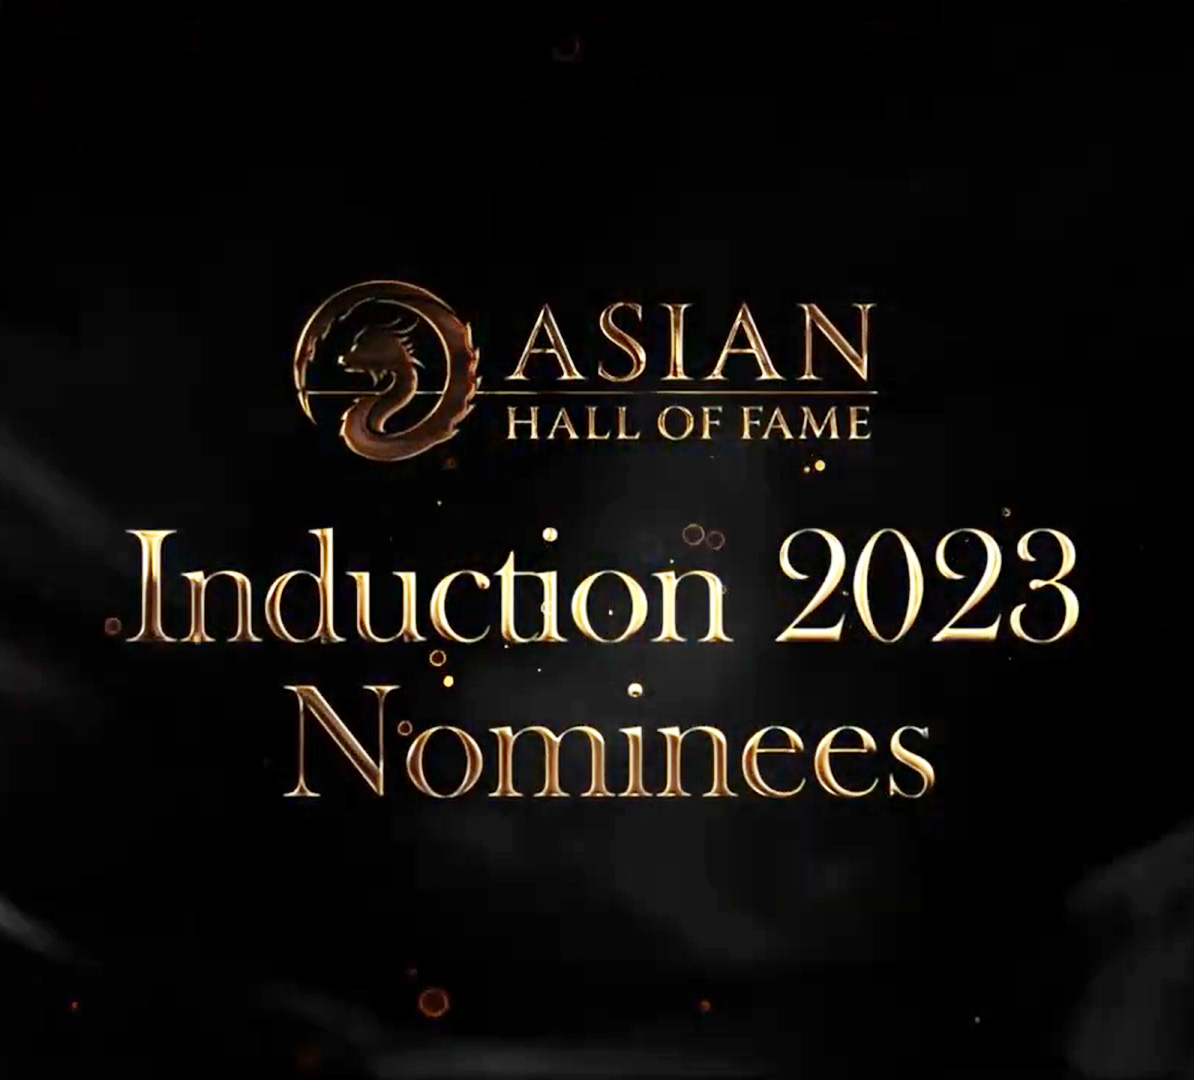 Asian Hall of Fame Nominees for Induction 2023